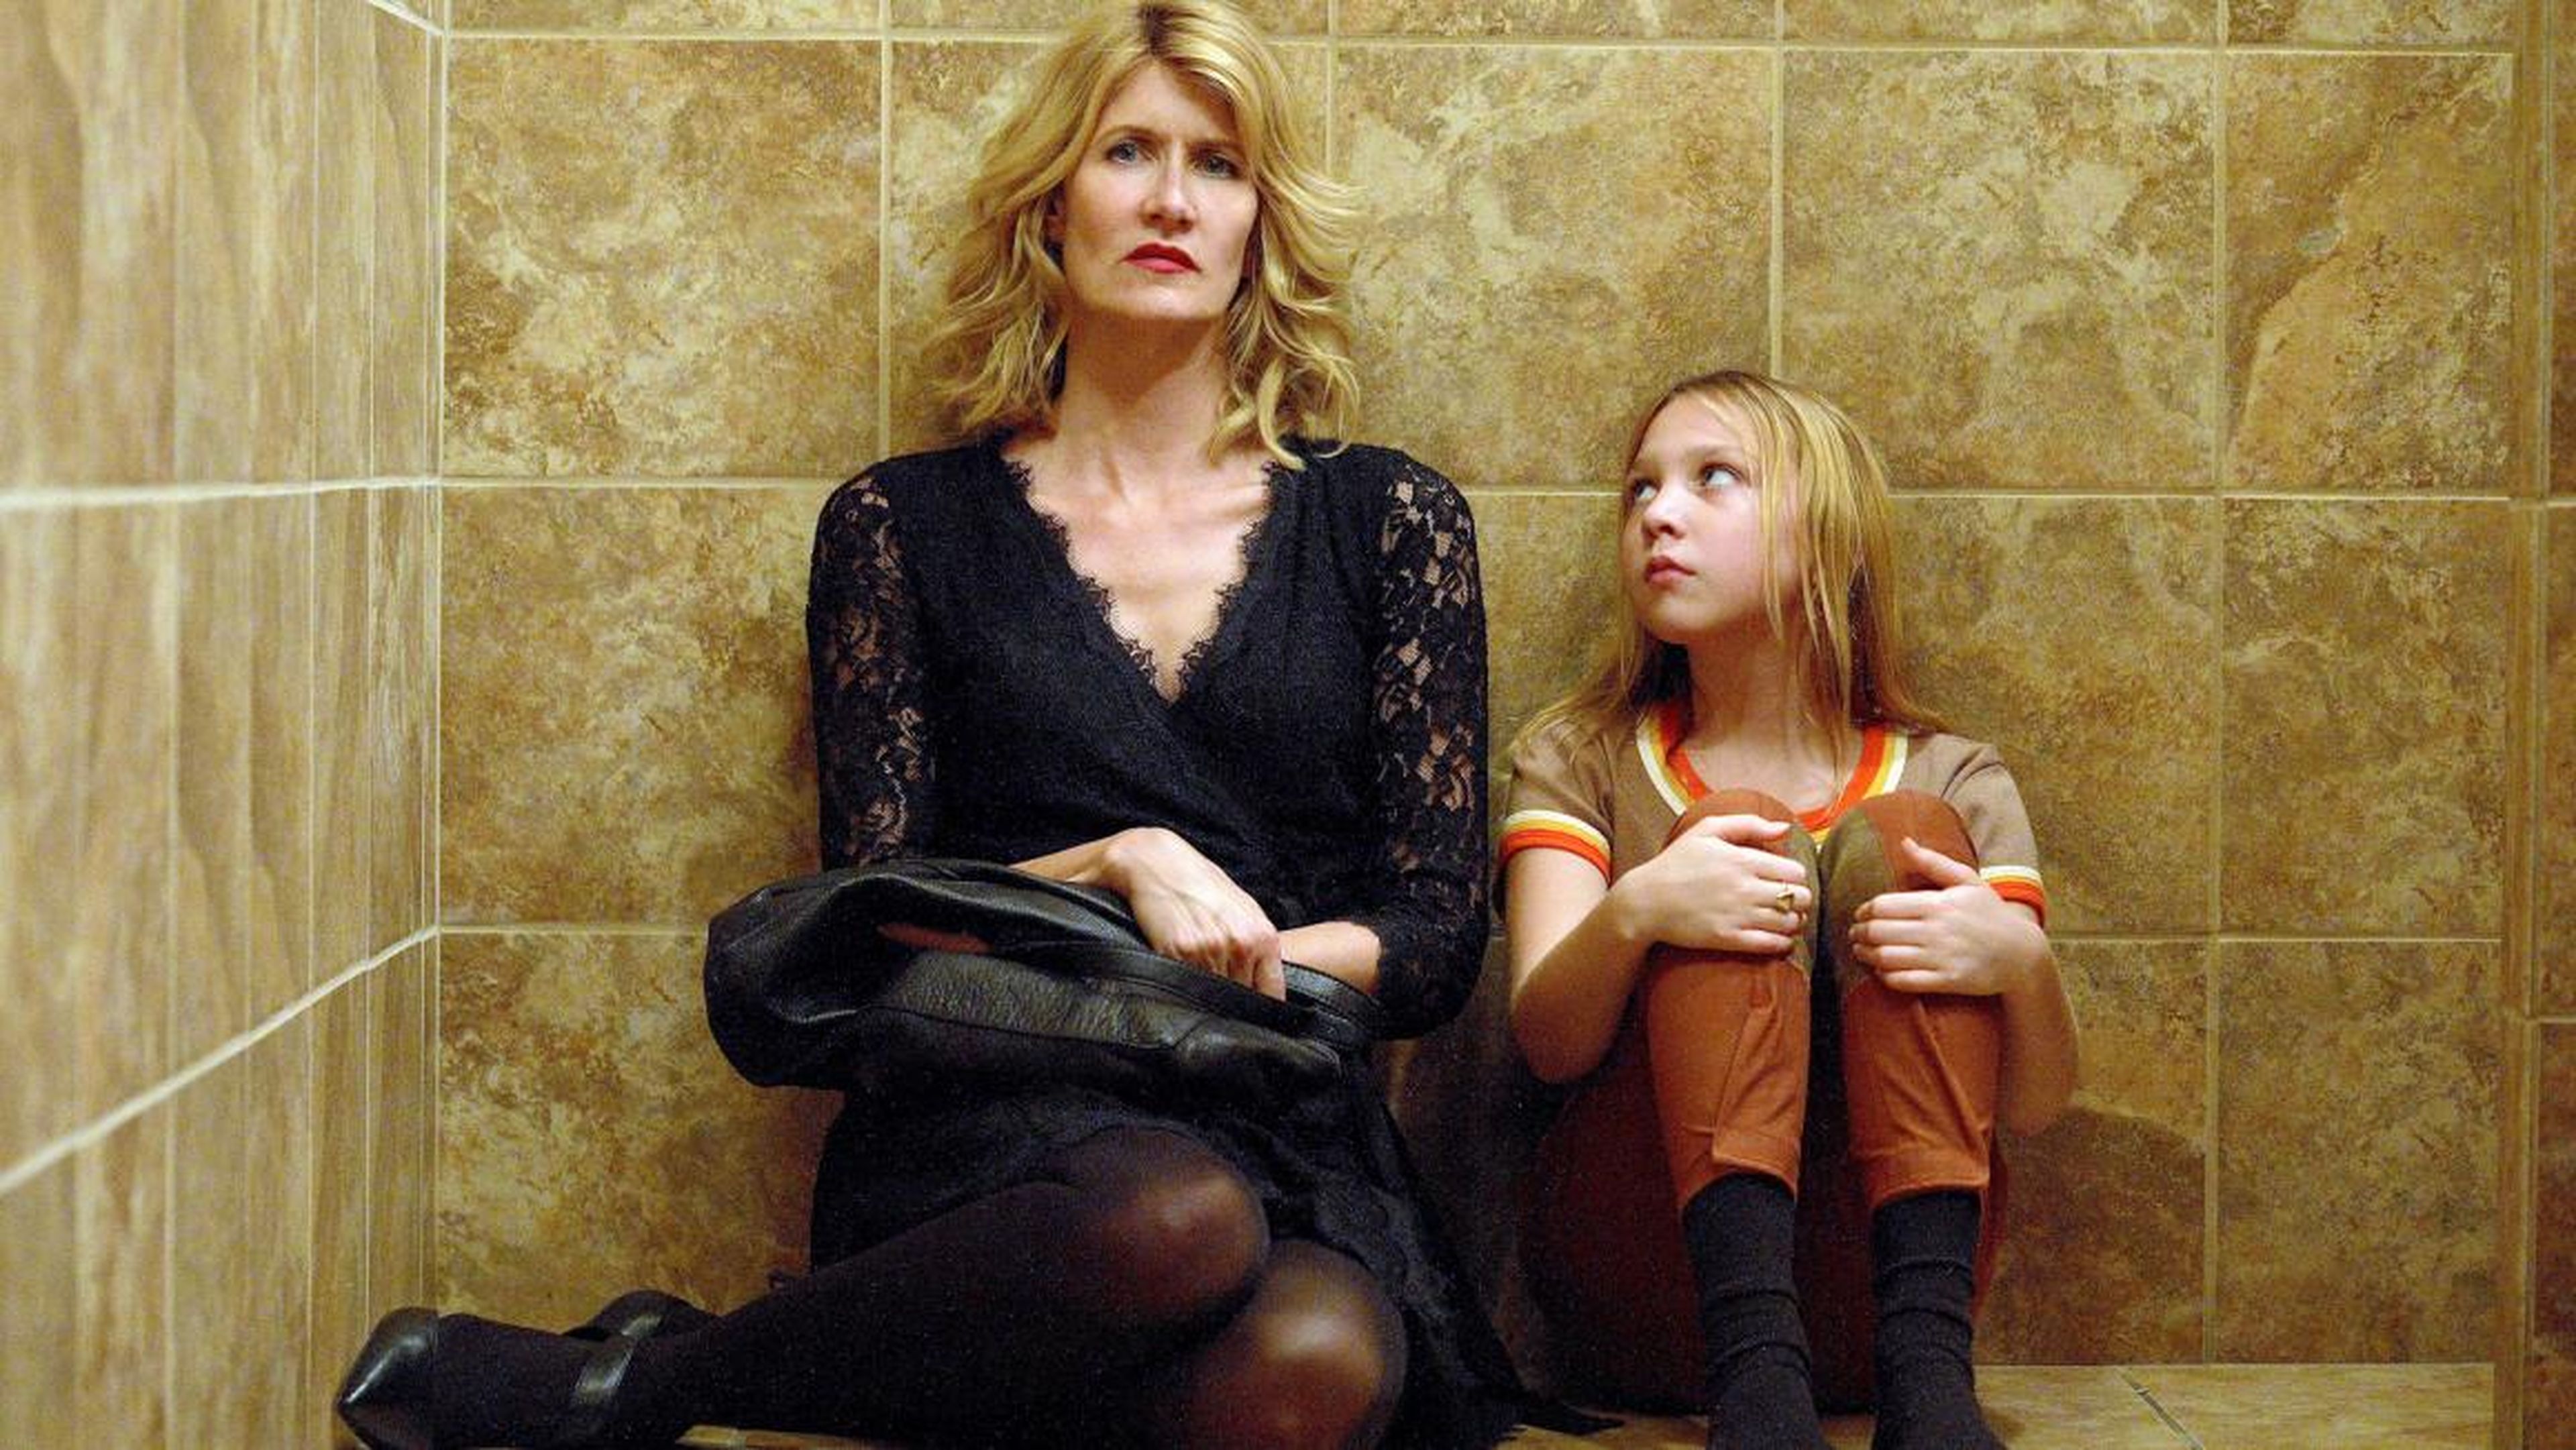 'The Tale' tells an honest story about childhood sexual abuse.